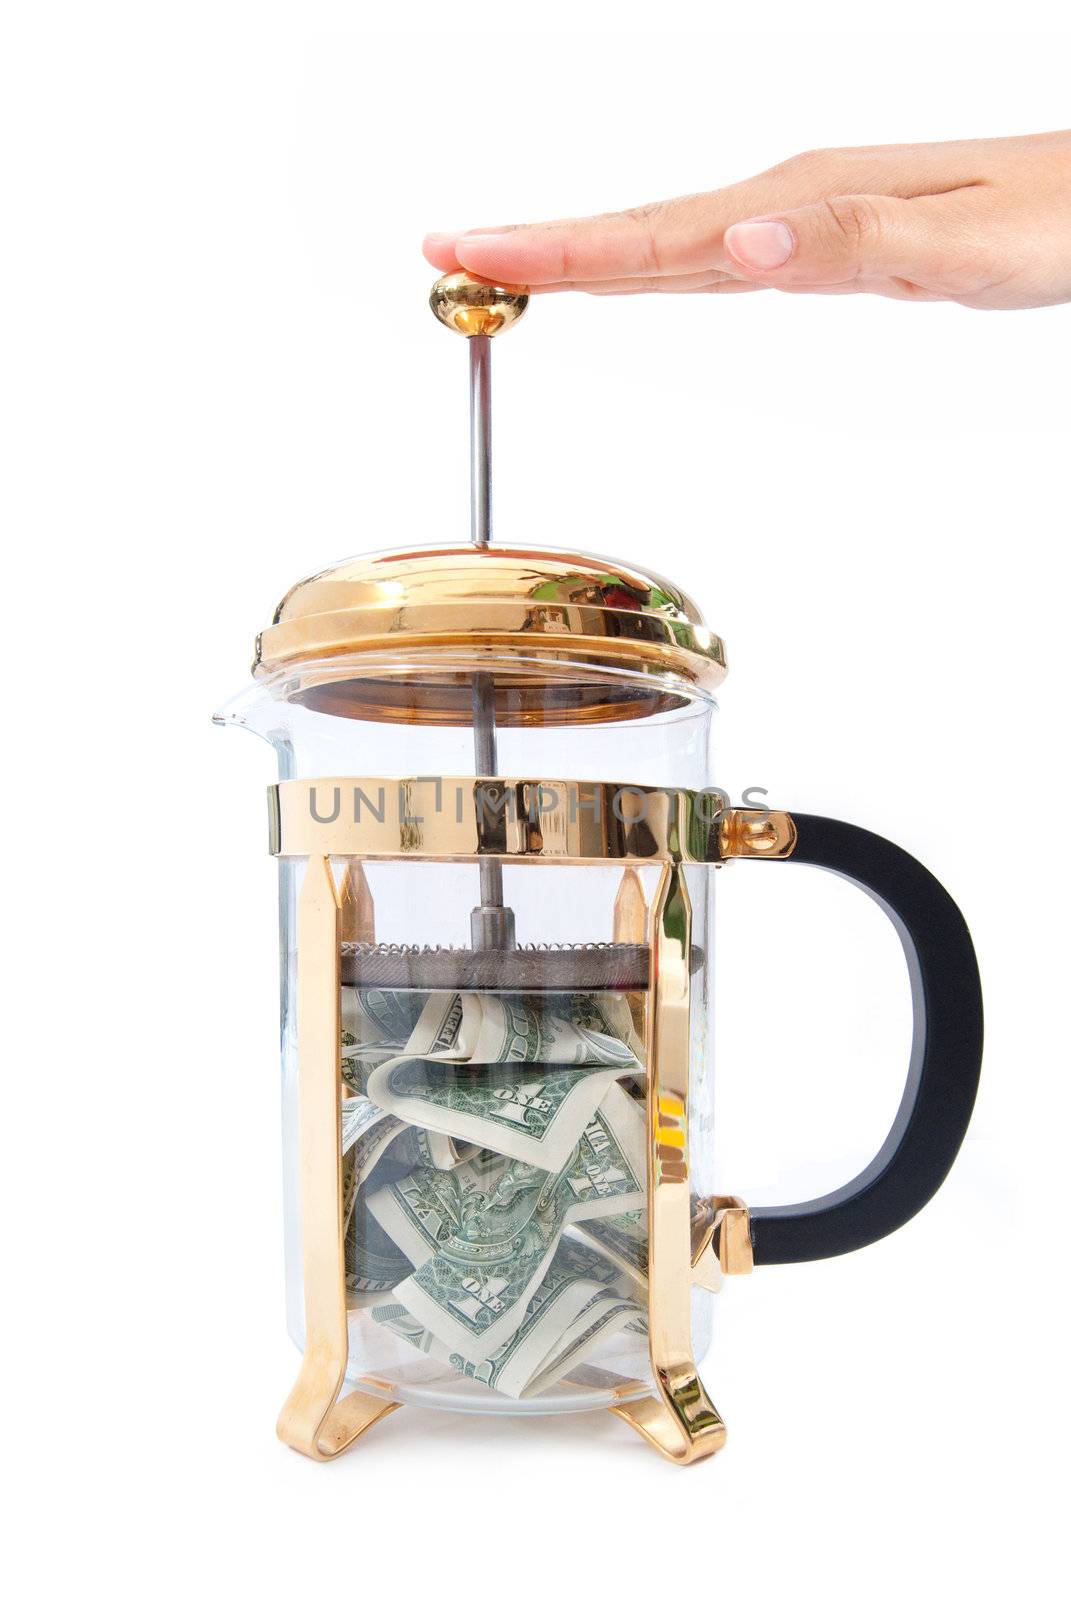 Banknotes being squeezed by a coffee plunger 